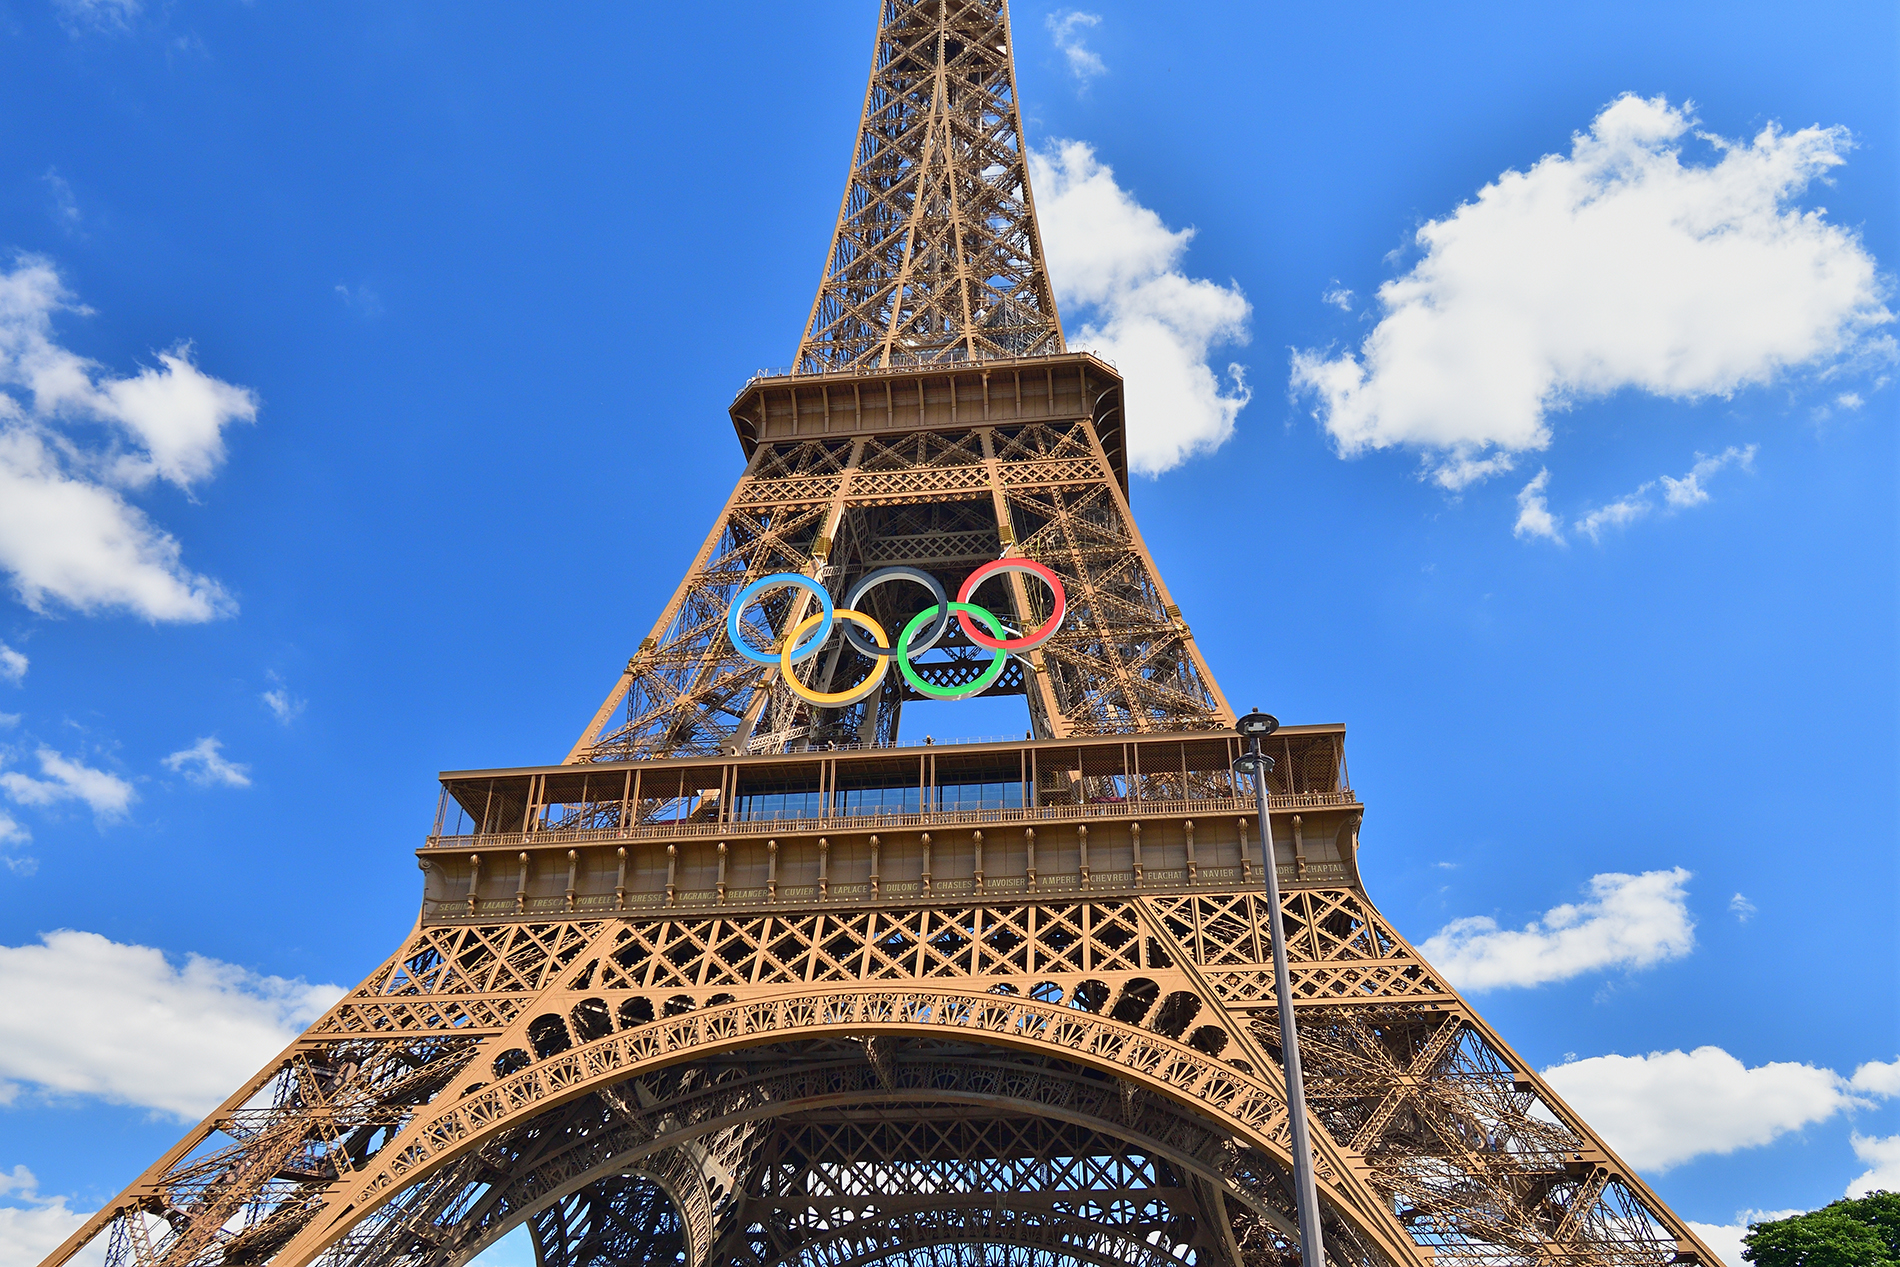 Olympic rings on Eiffel Tower